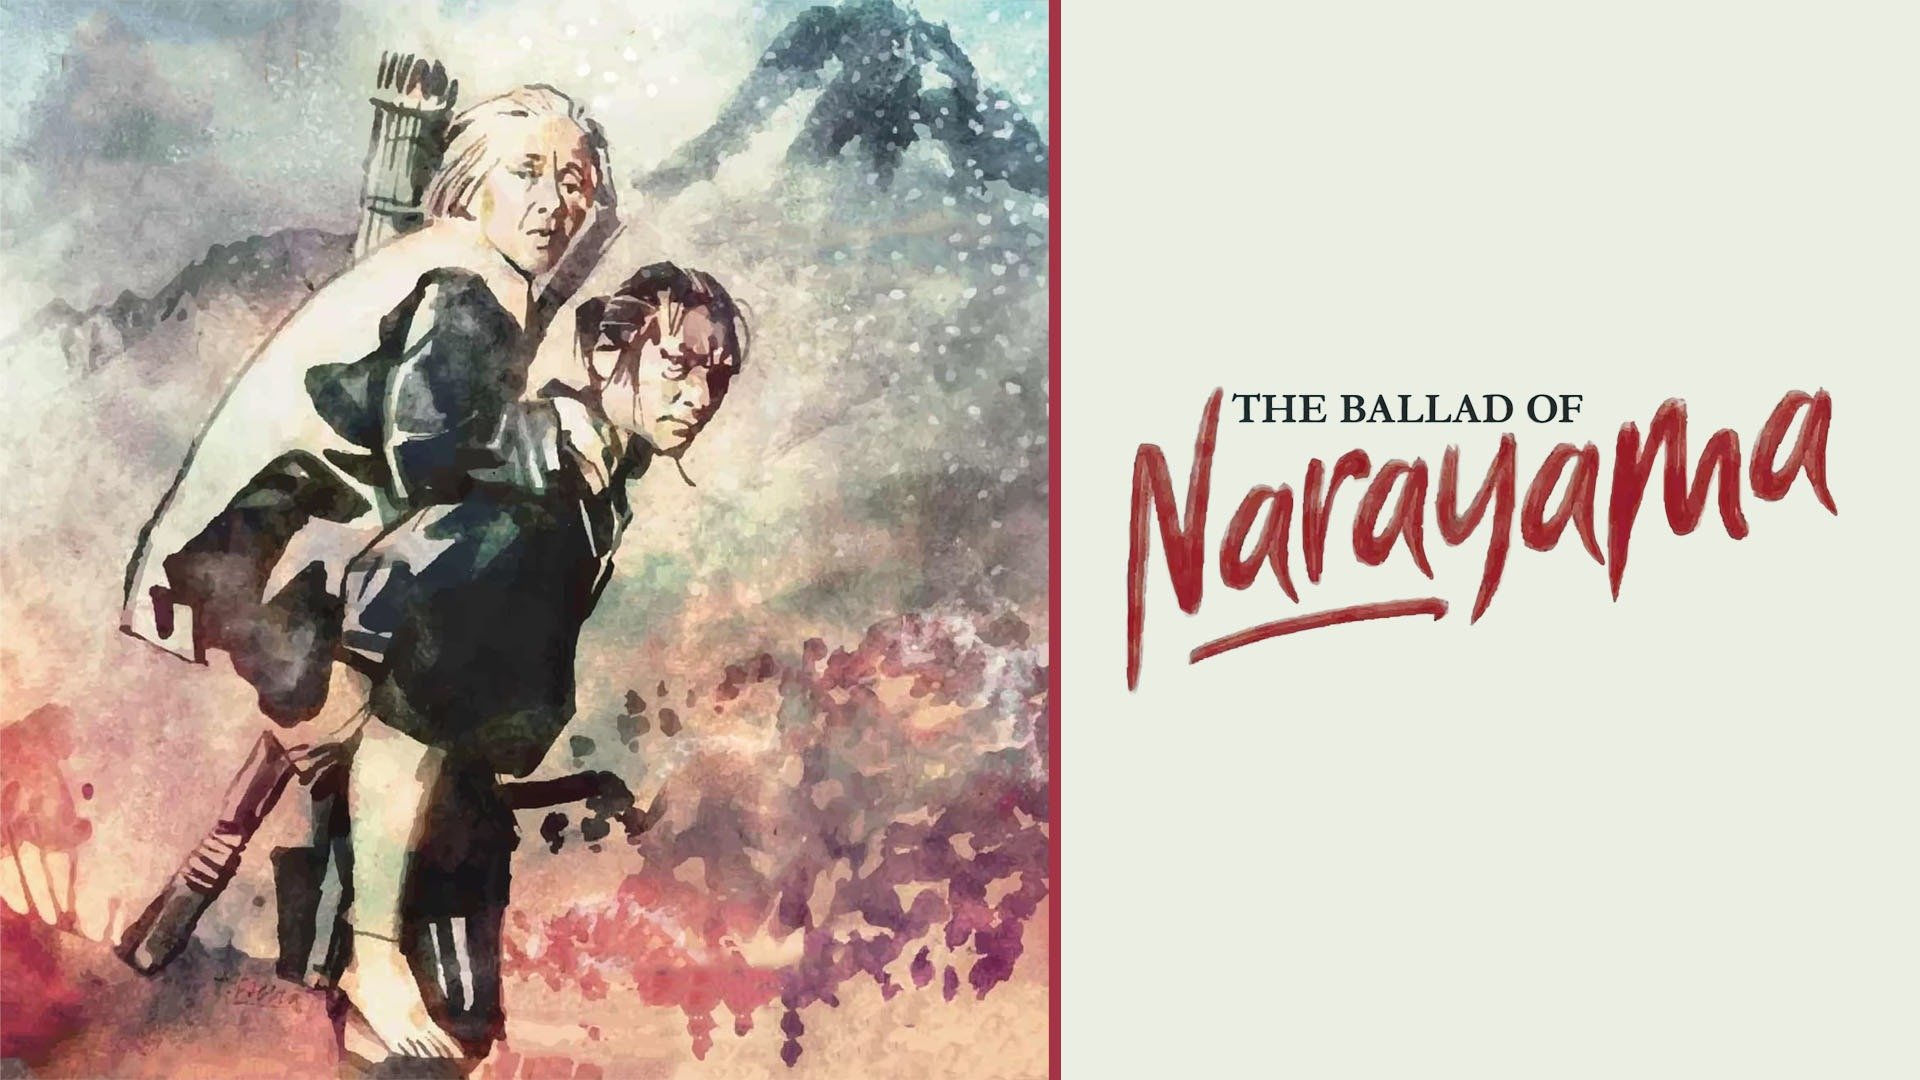 38-facts-about-the-movie-the-ballad-of-narayama